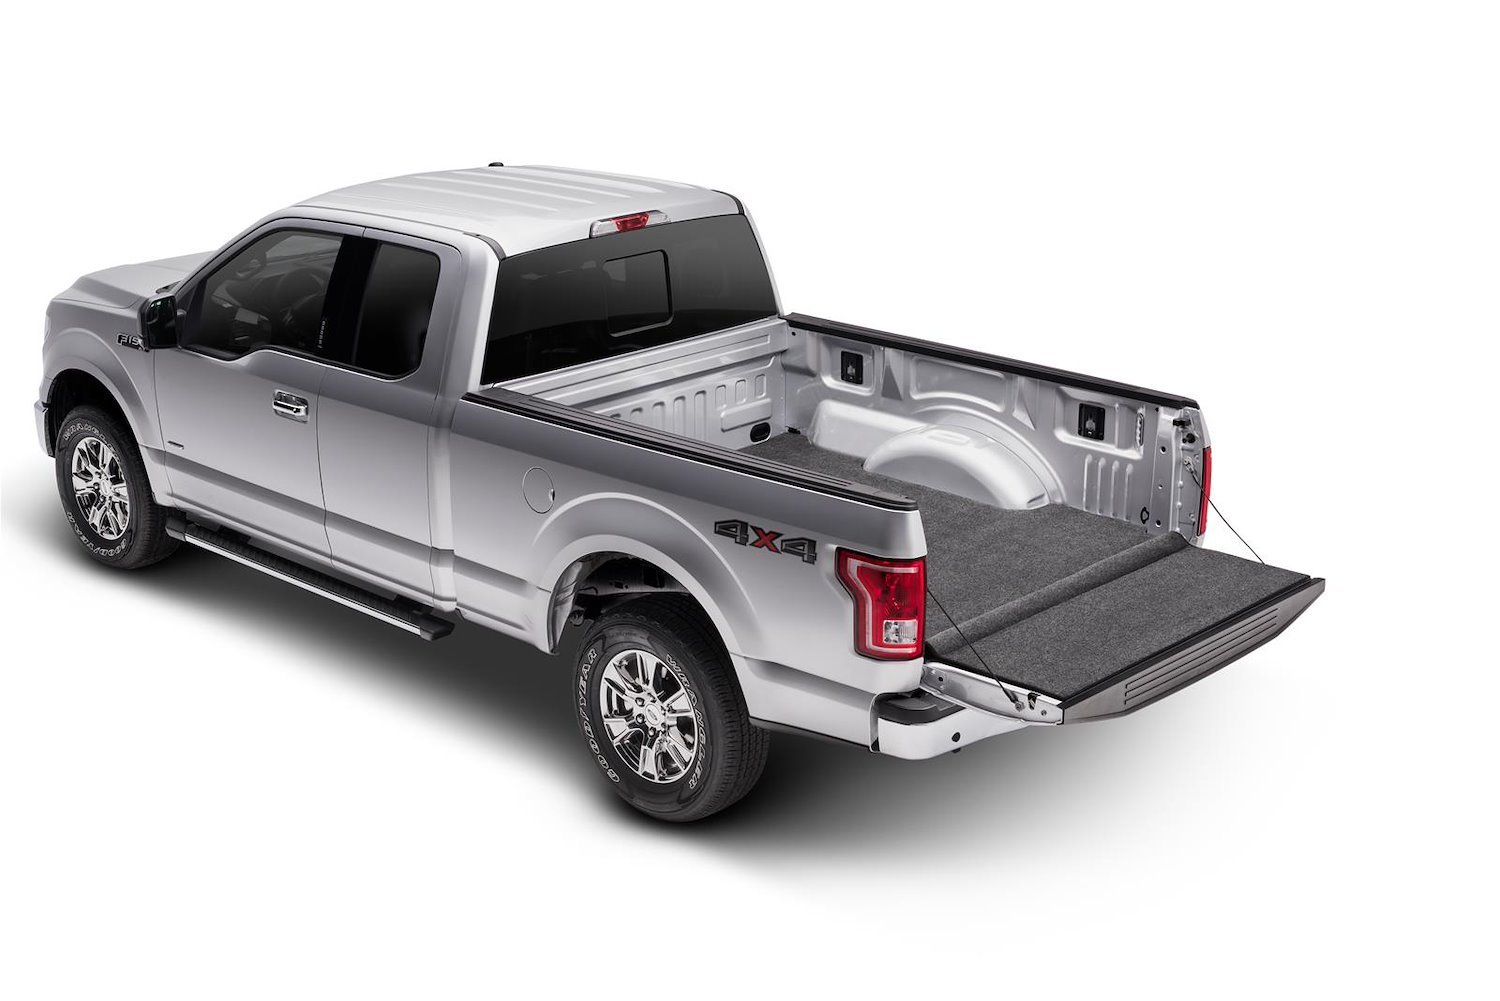 XLTBMC07LBS XLT BEDMAT FOR SPRAY-IN OR NO BED LINER 07-18 GM SILVERADO/SIERRA 8' BED